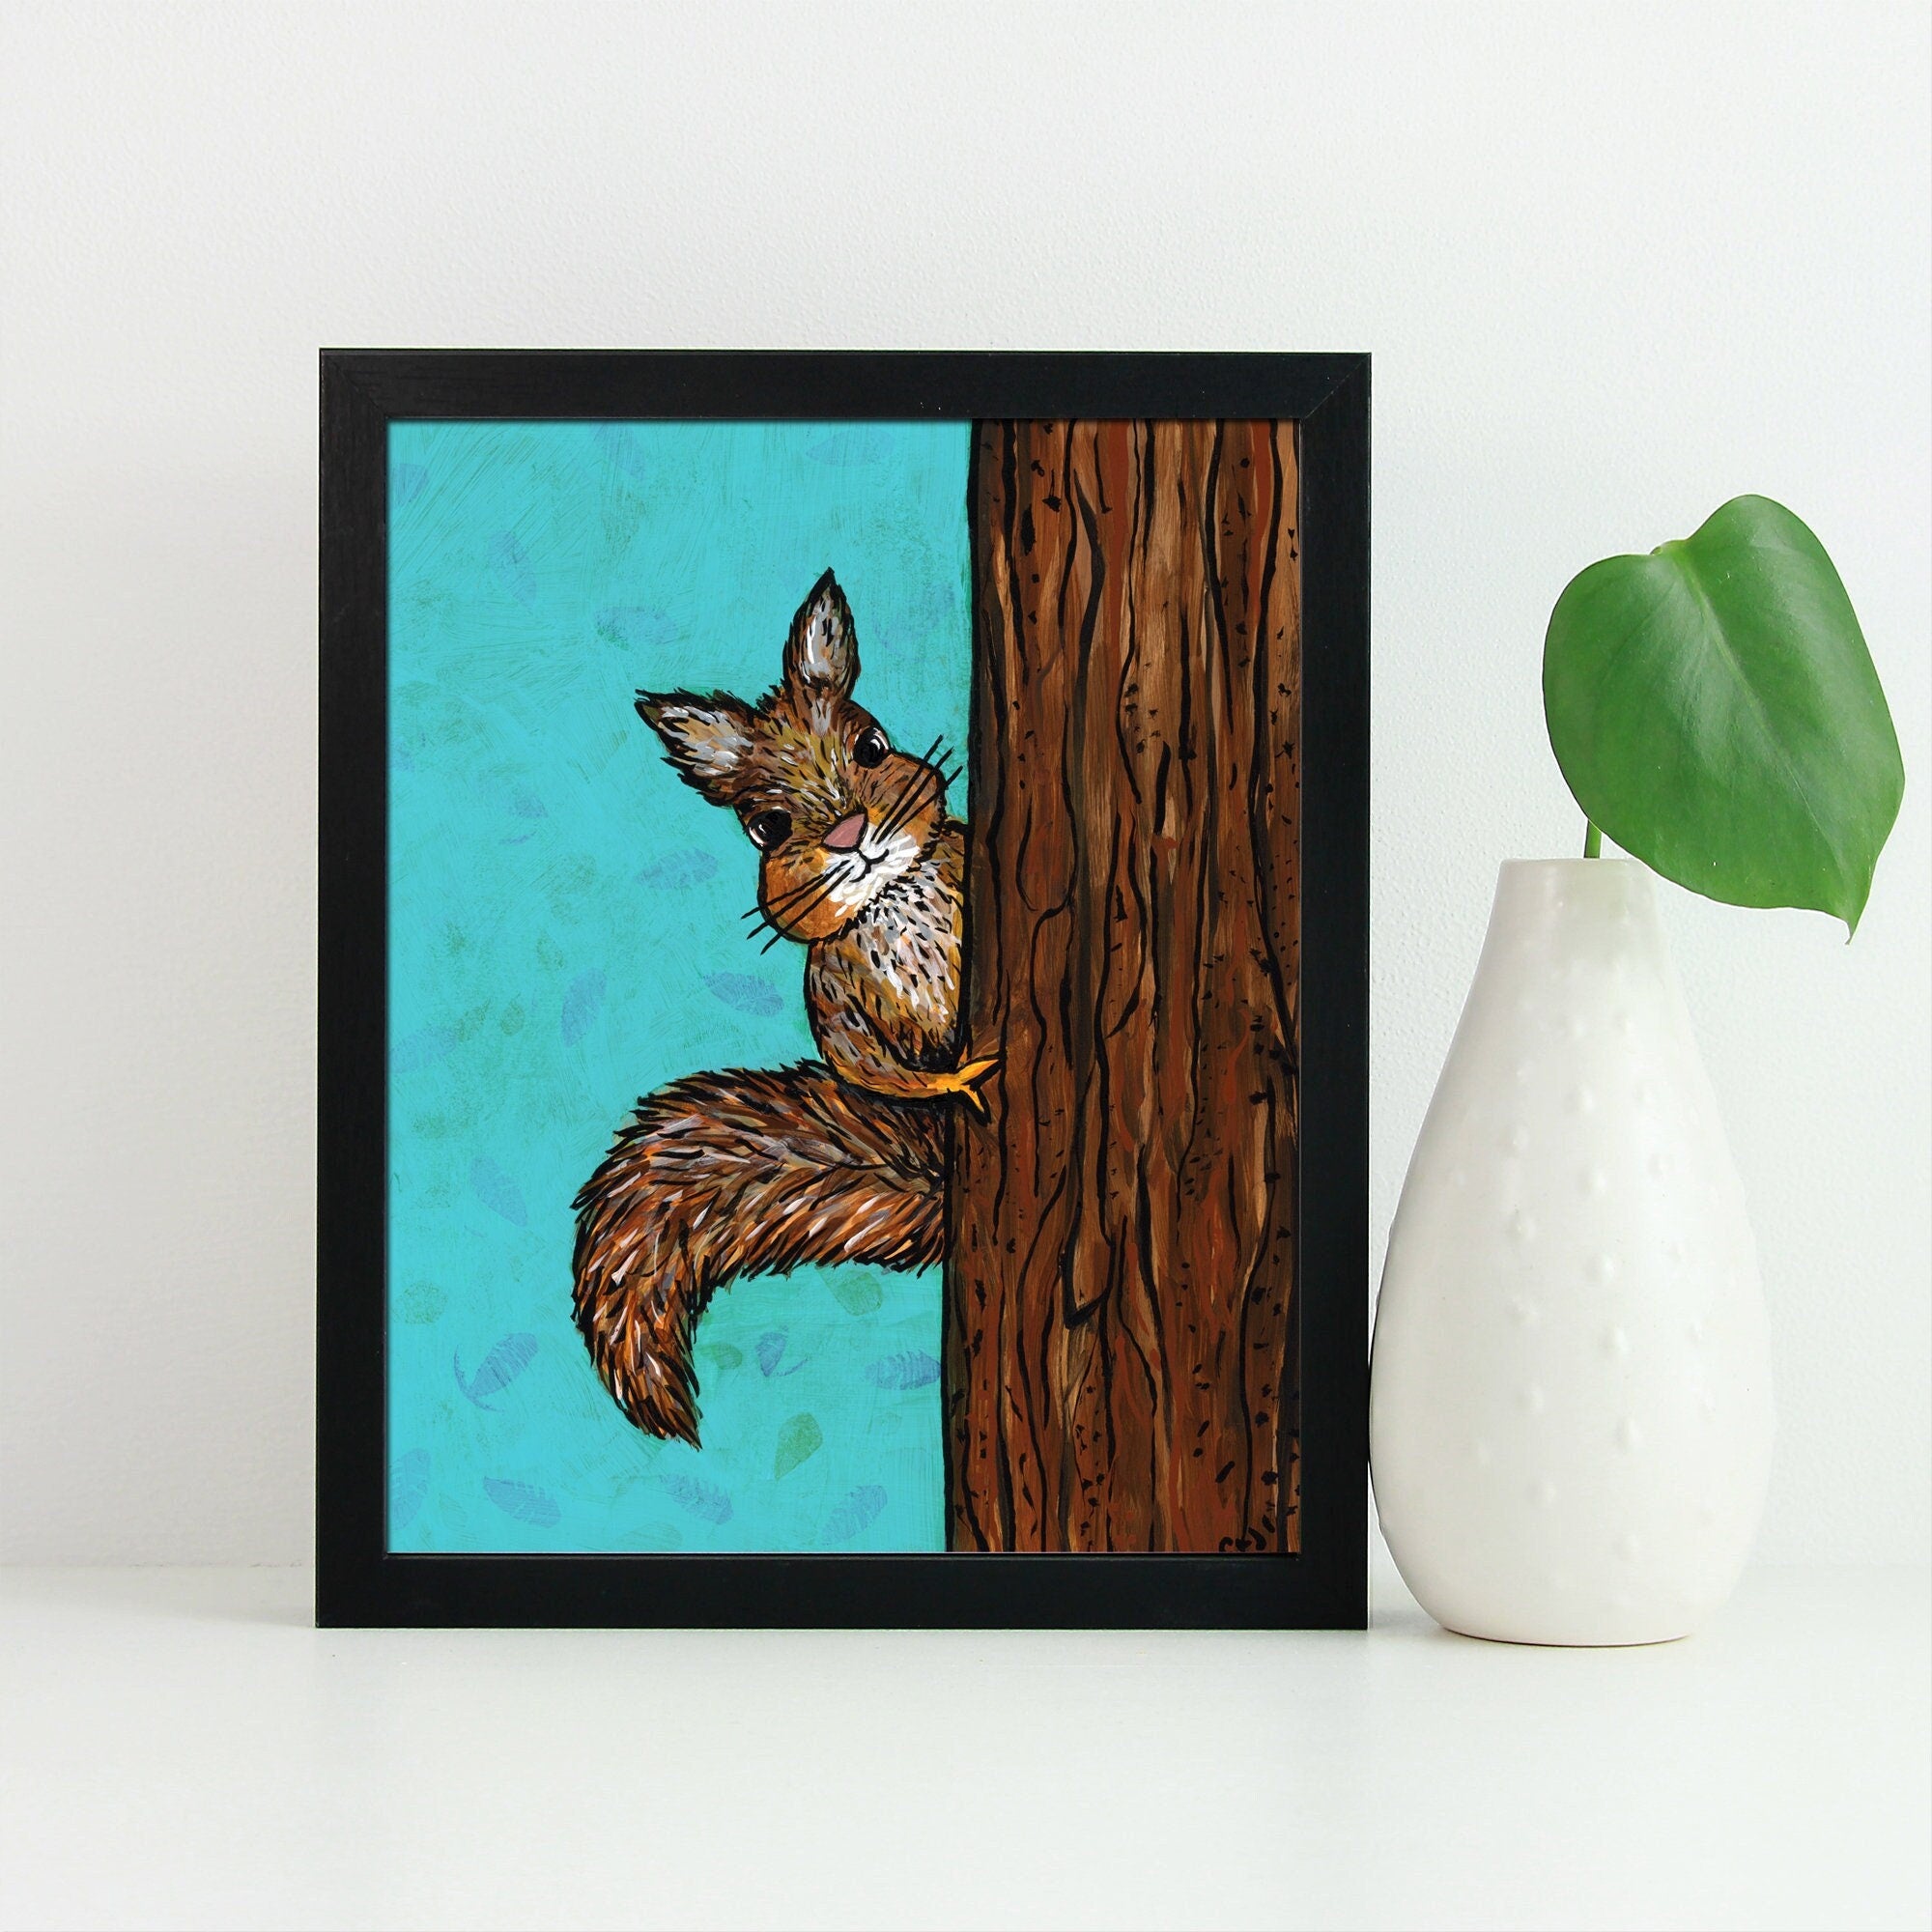 Squirrel Print - Squirrel in a Tree Wall Art Print - Wildlife 8 x 10 inch print with optional black mat